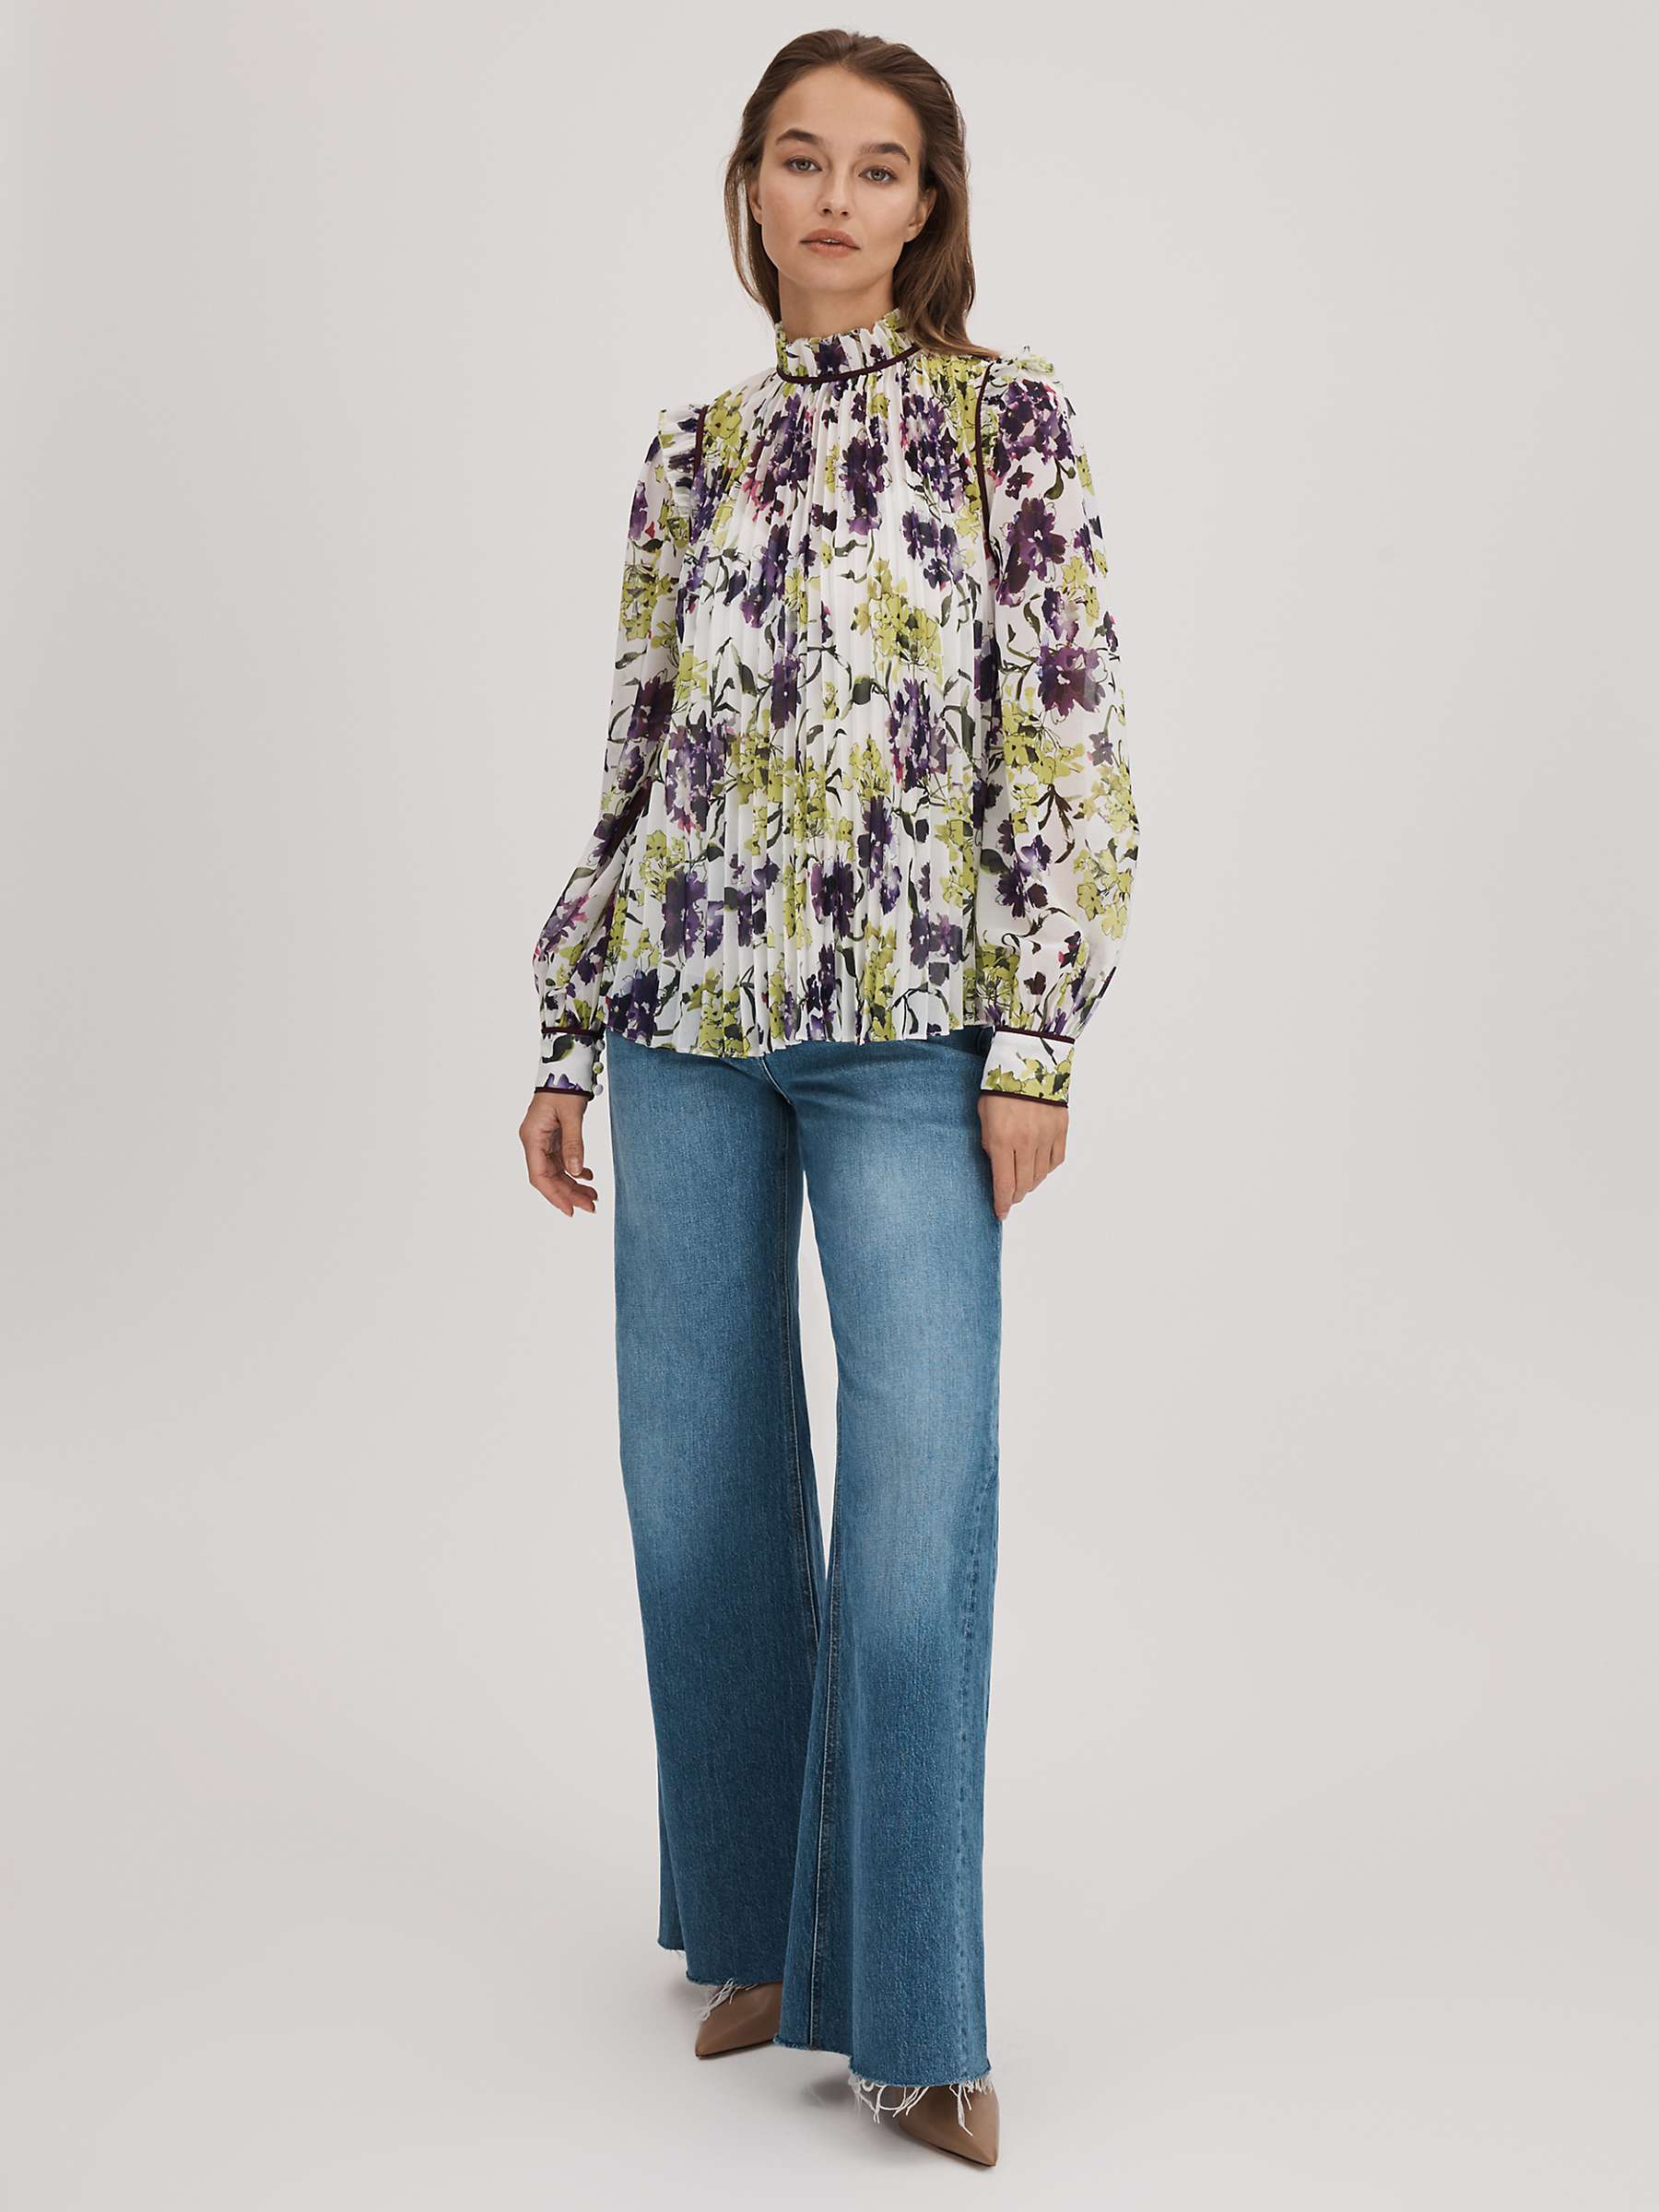 Buy FLORERE Floral Print Pleated Blouse, Ivory/Multi Online at johnlewis.com